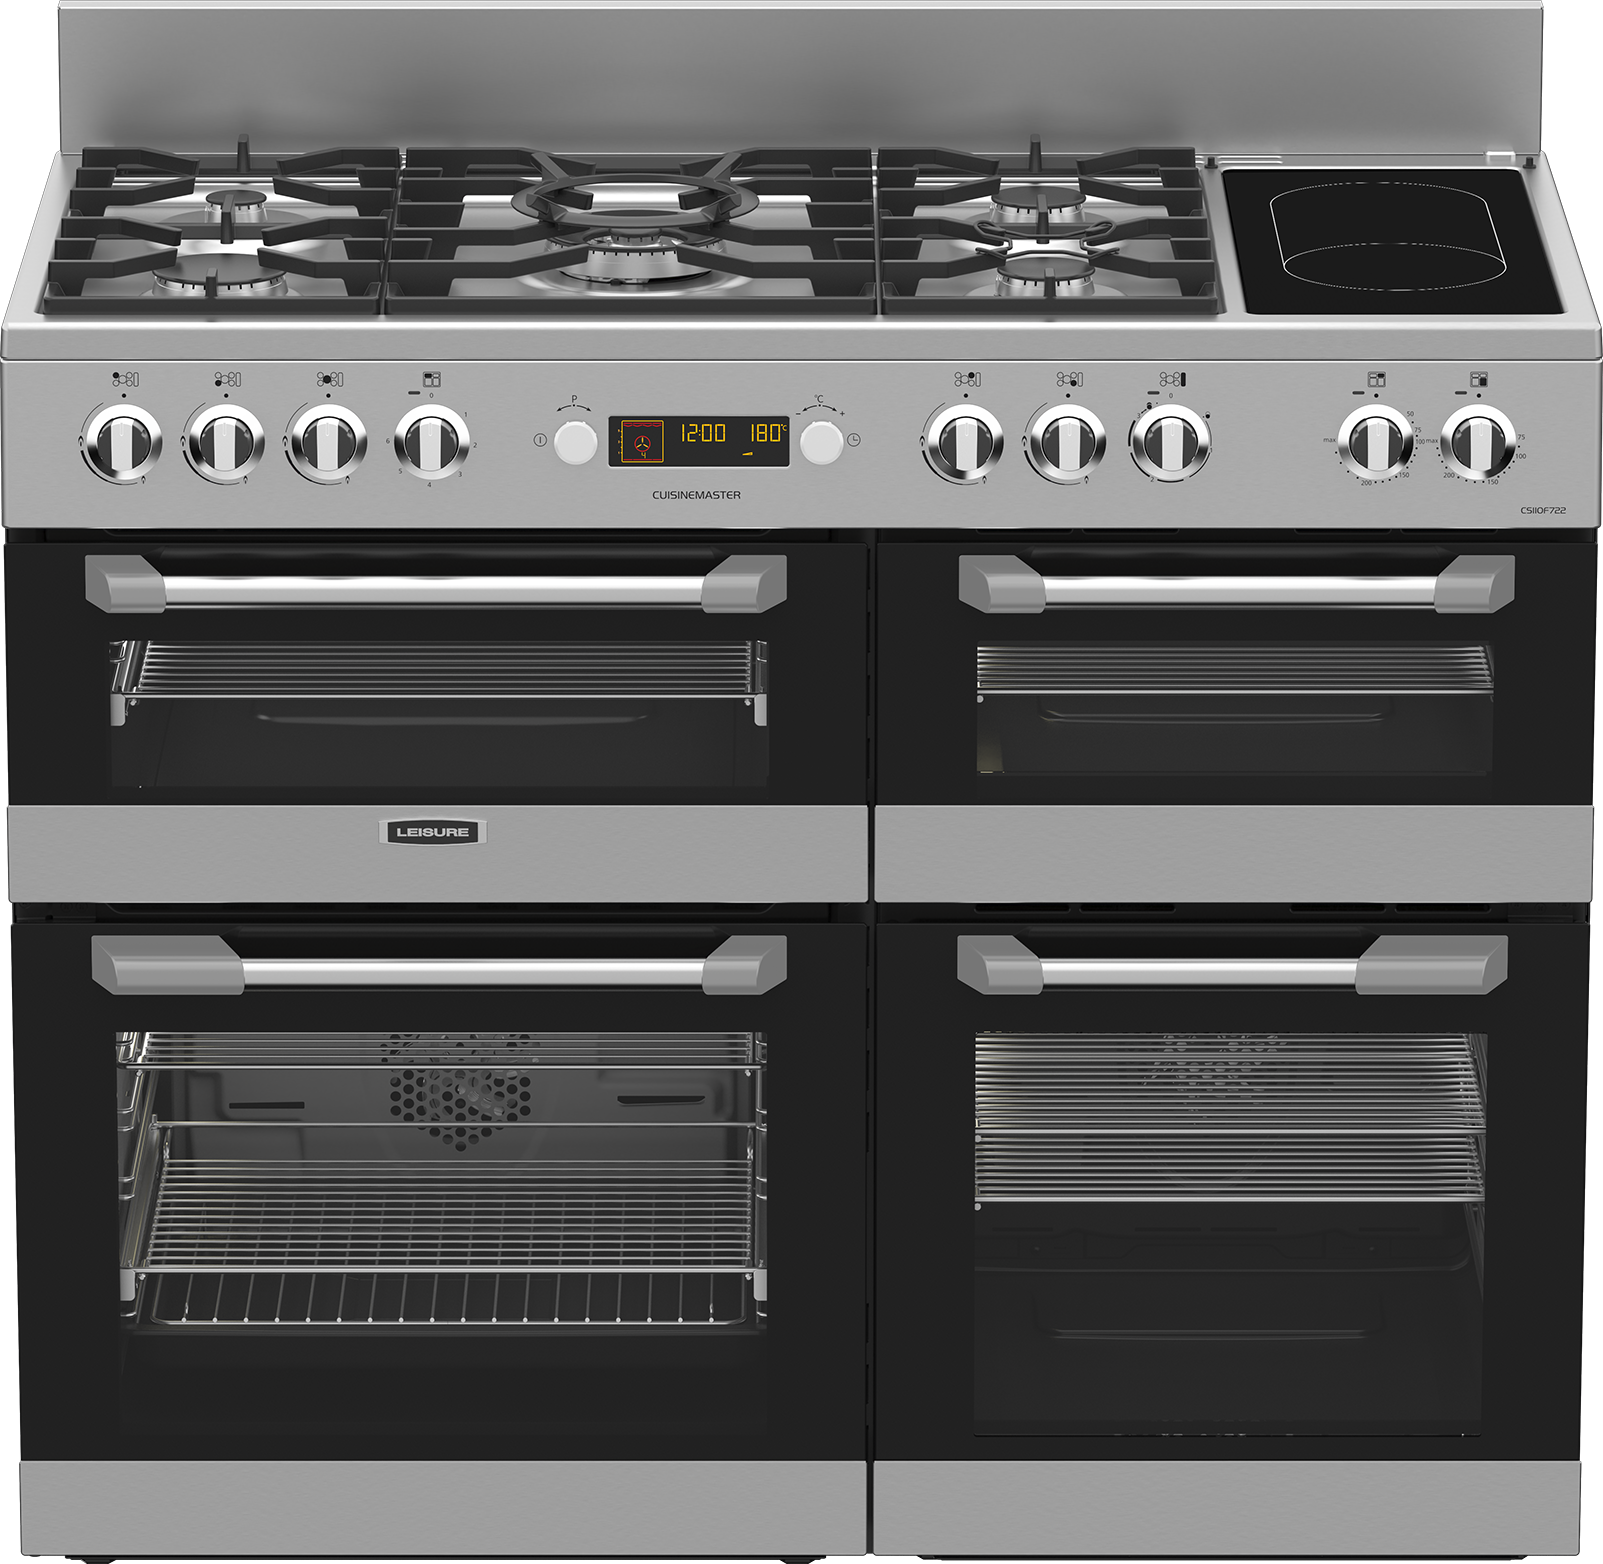 Leisure Cuisinemaster CS110F722X 110cm Dual Fuel Range Cooker - Stainless Steel - A/A/A Rated, Stainless Steel